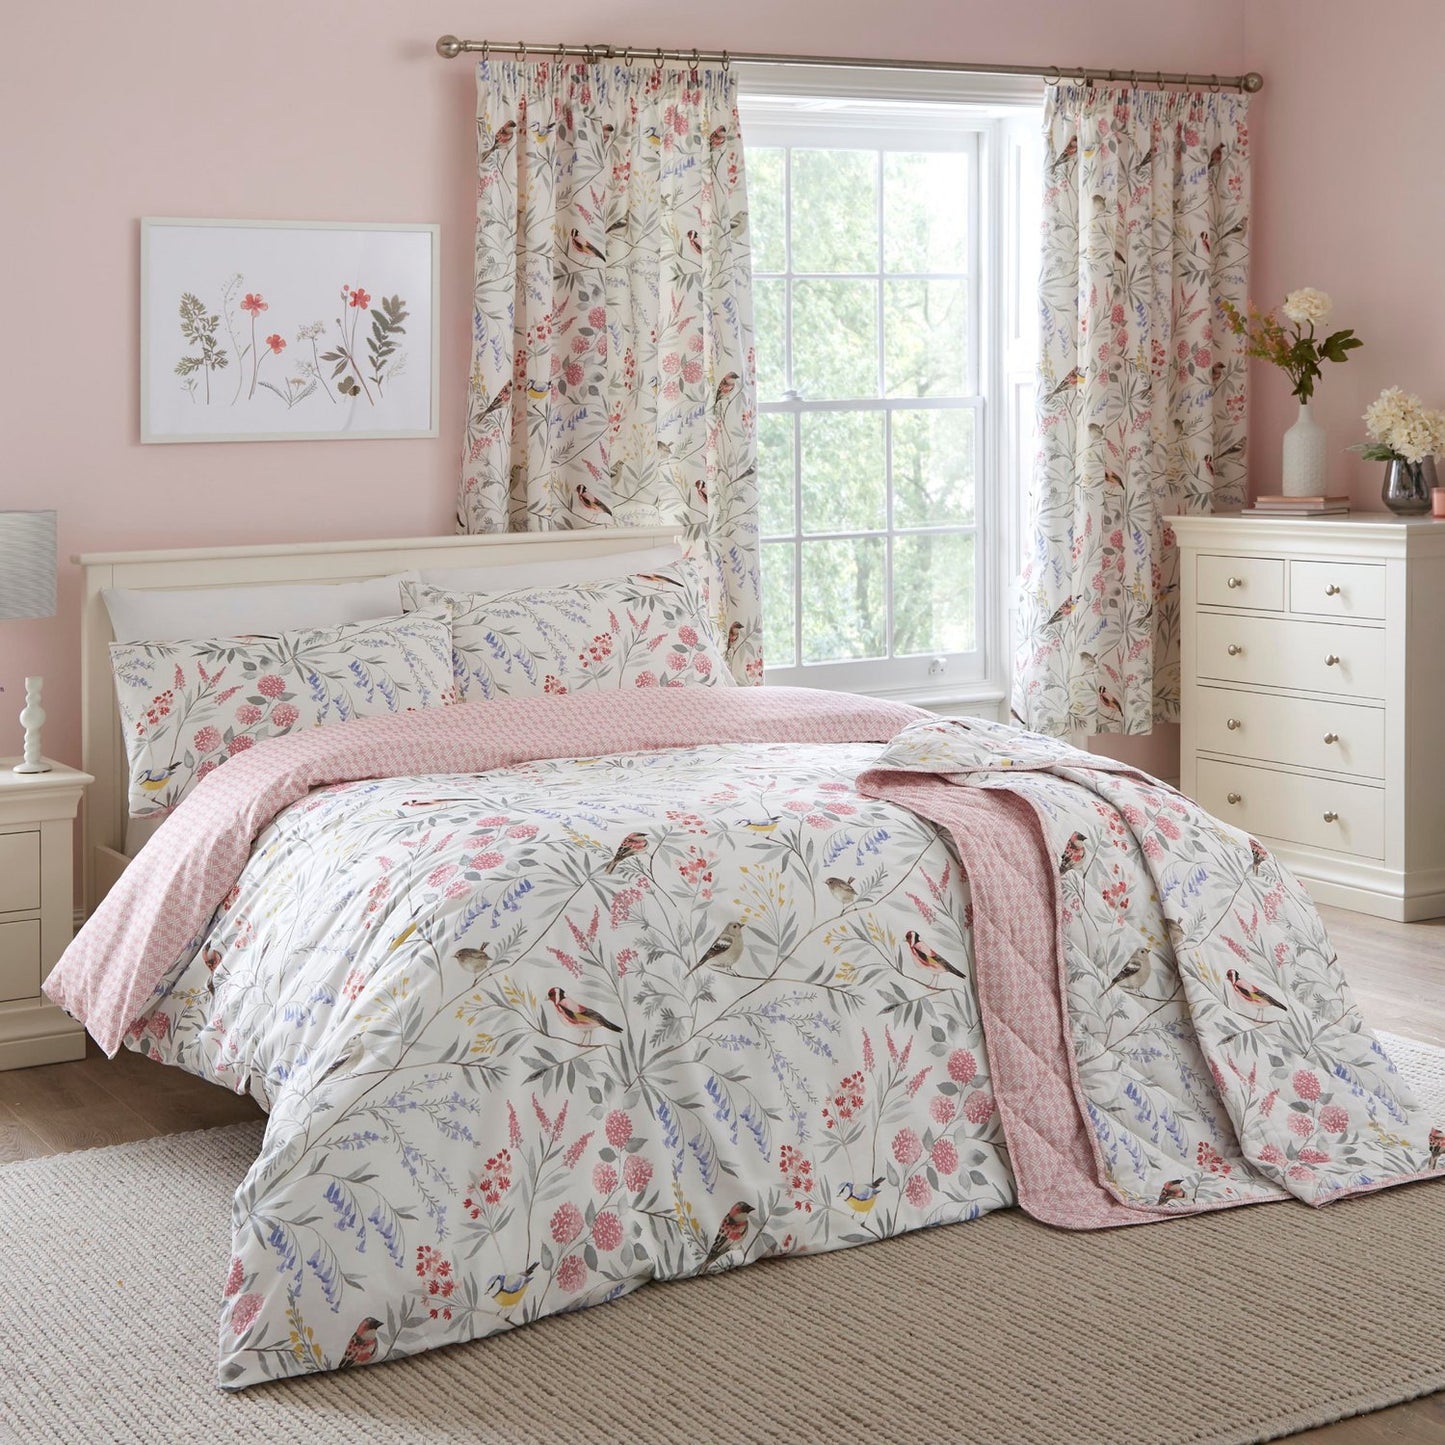 Caraway Pink Floral Quilted Bedspread